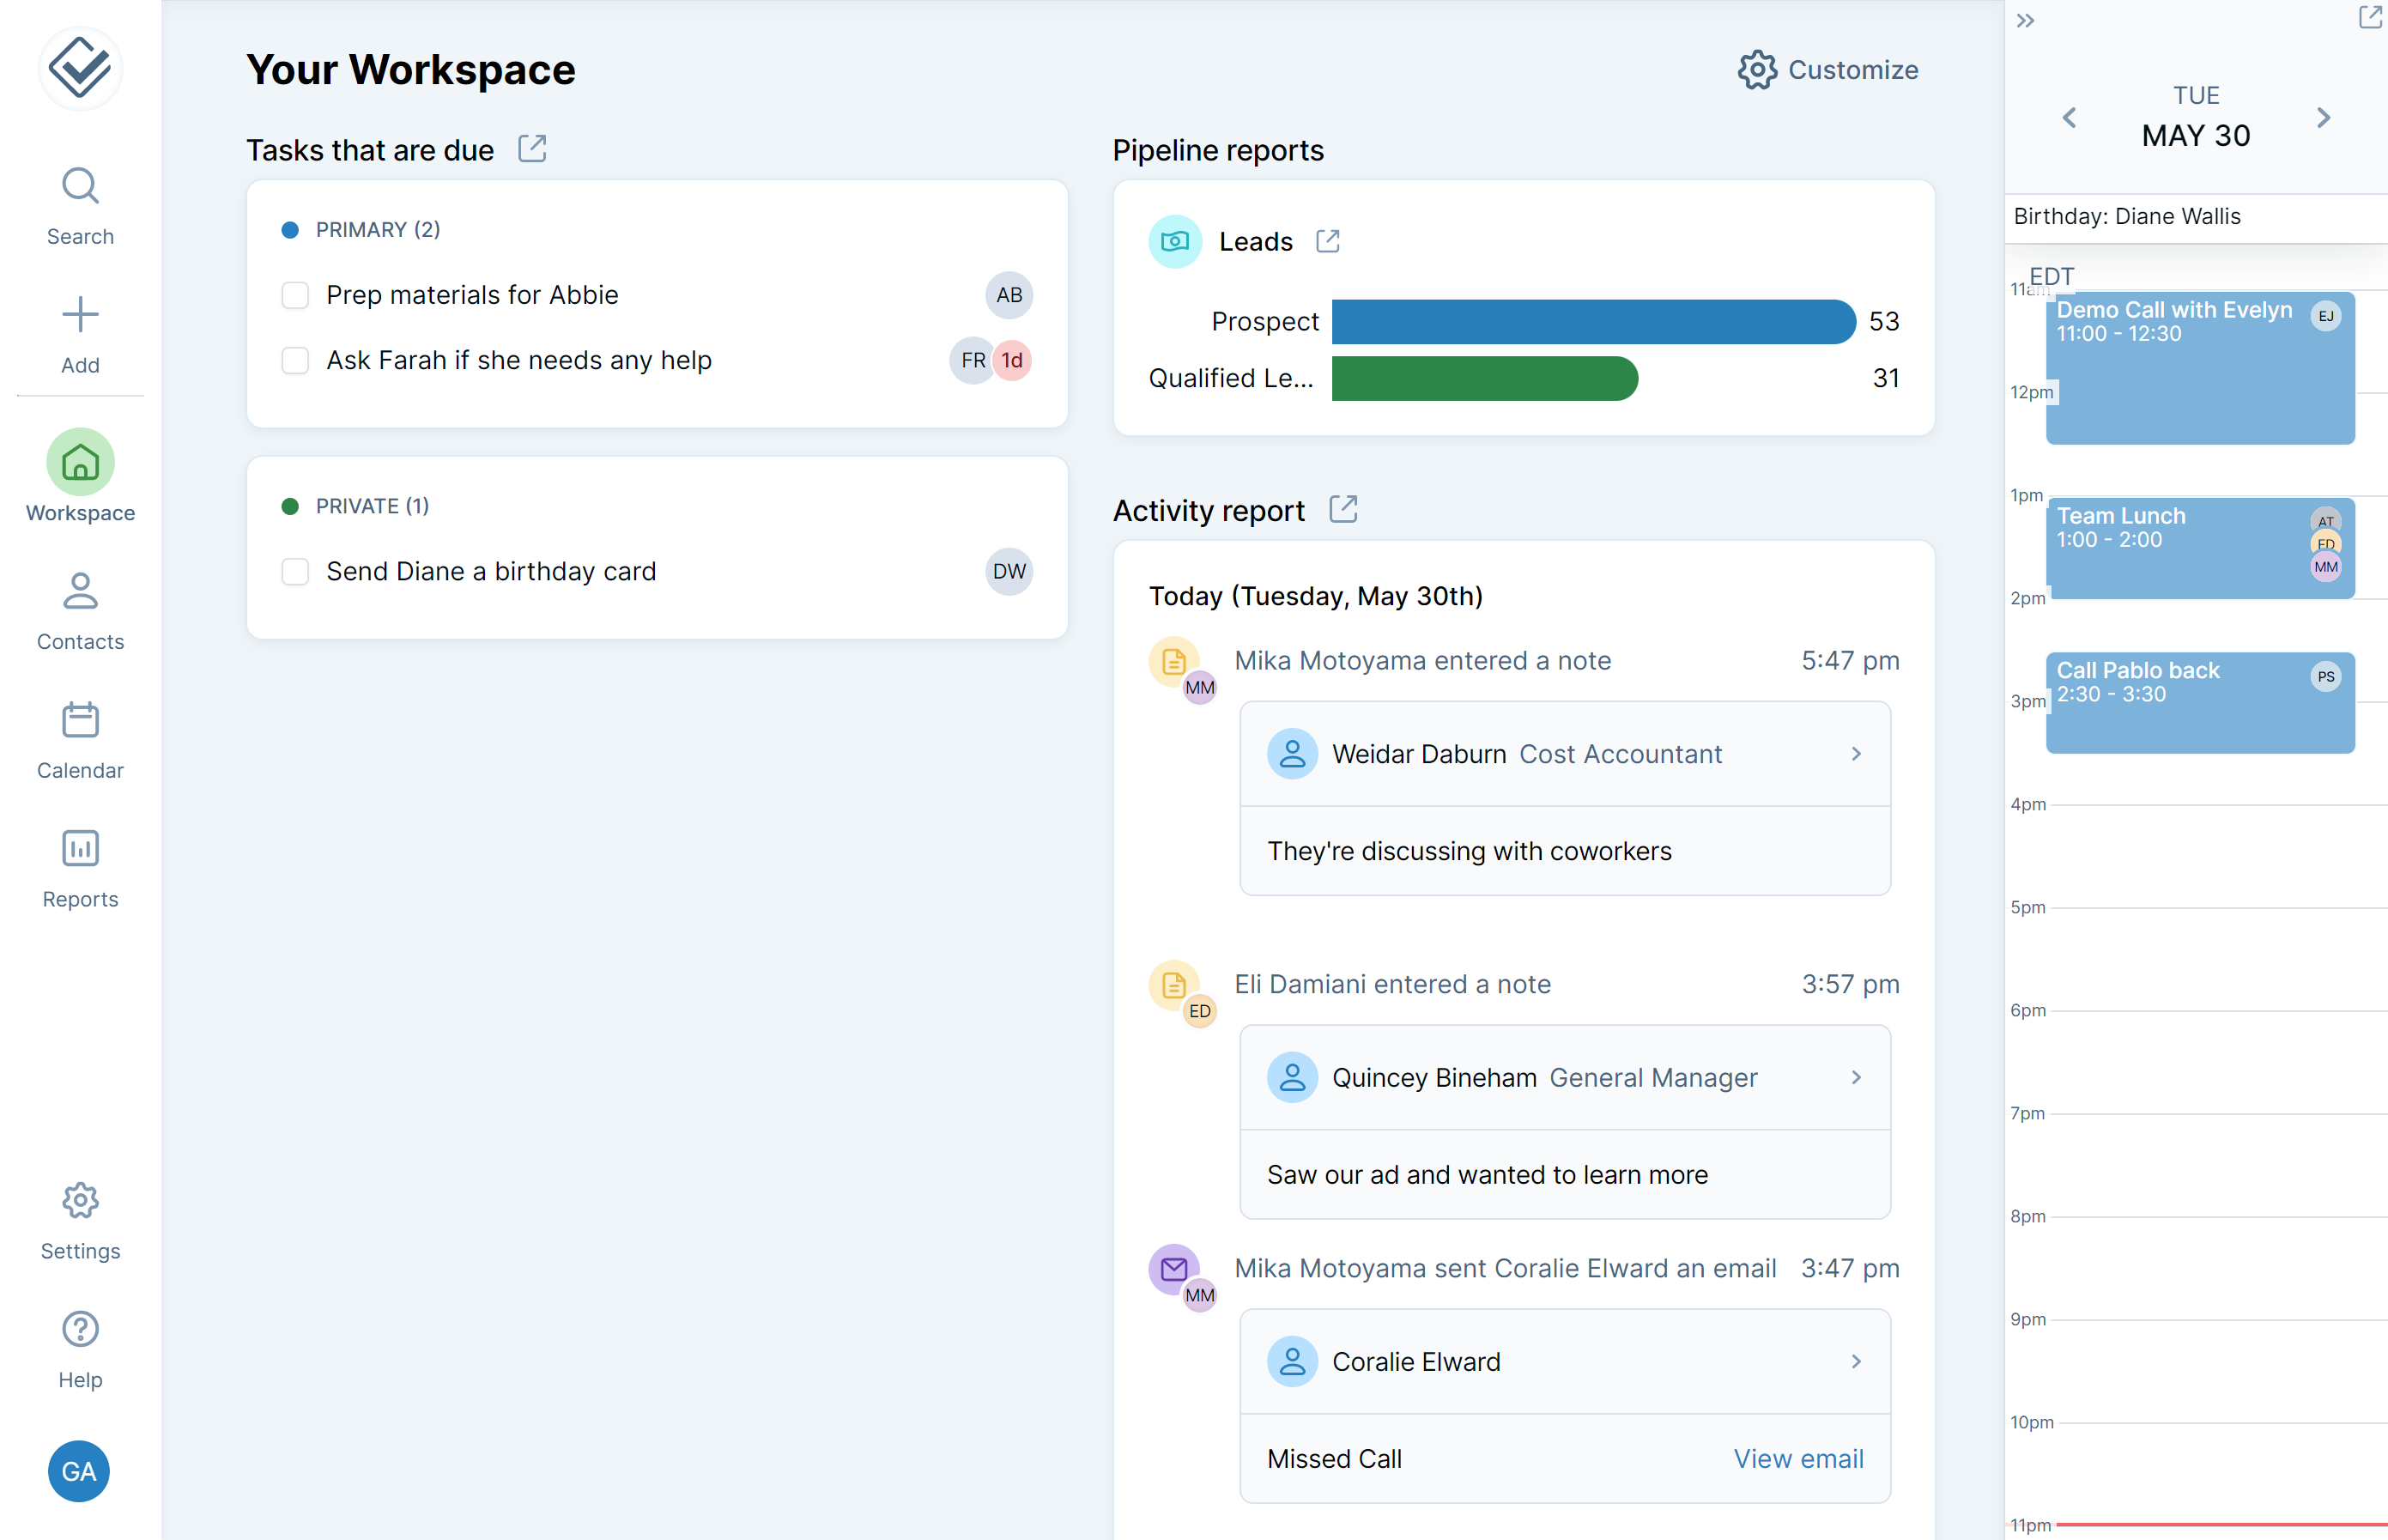 Your Workspace - your daily dashboard that shows you what you need to get done today.